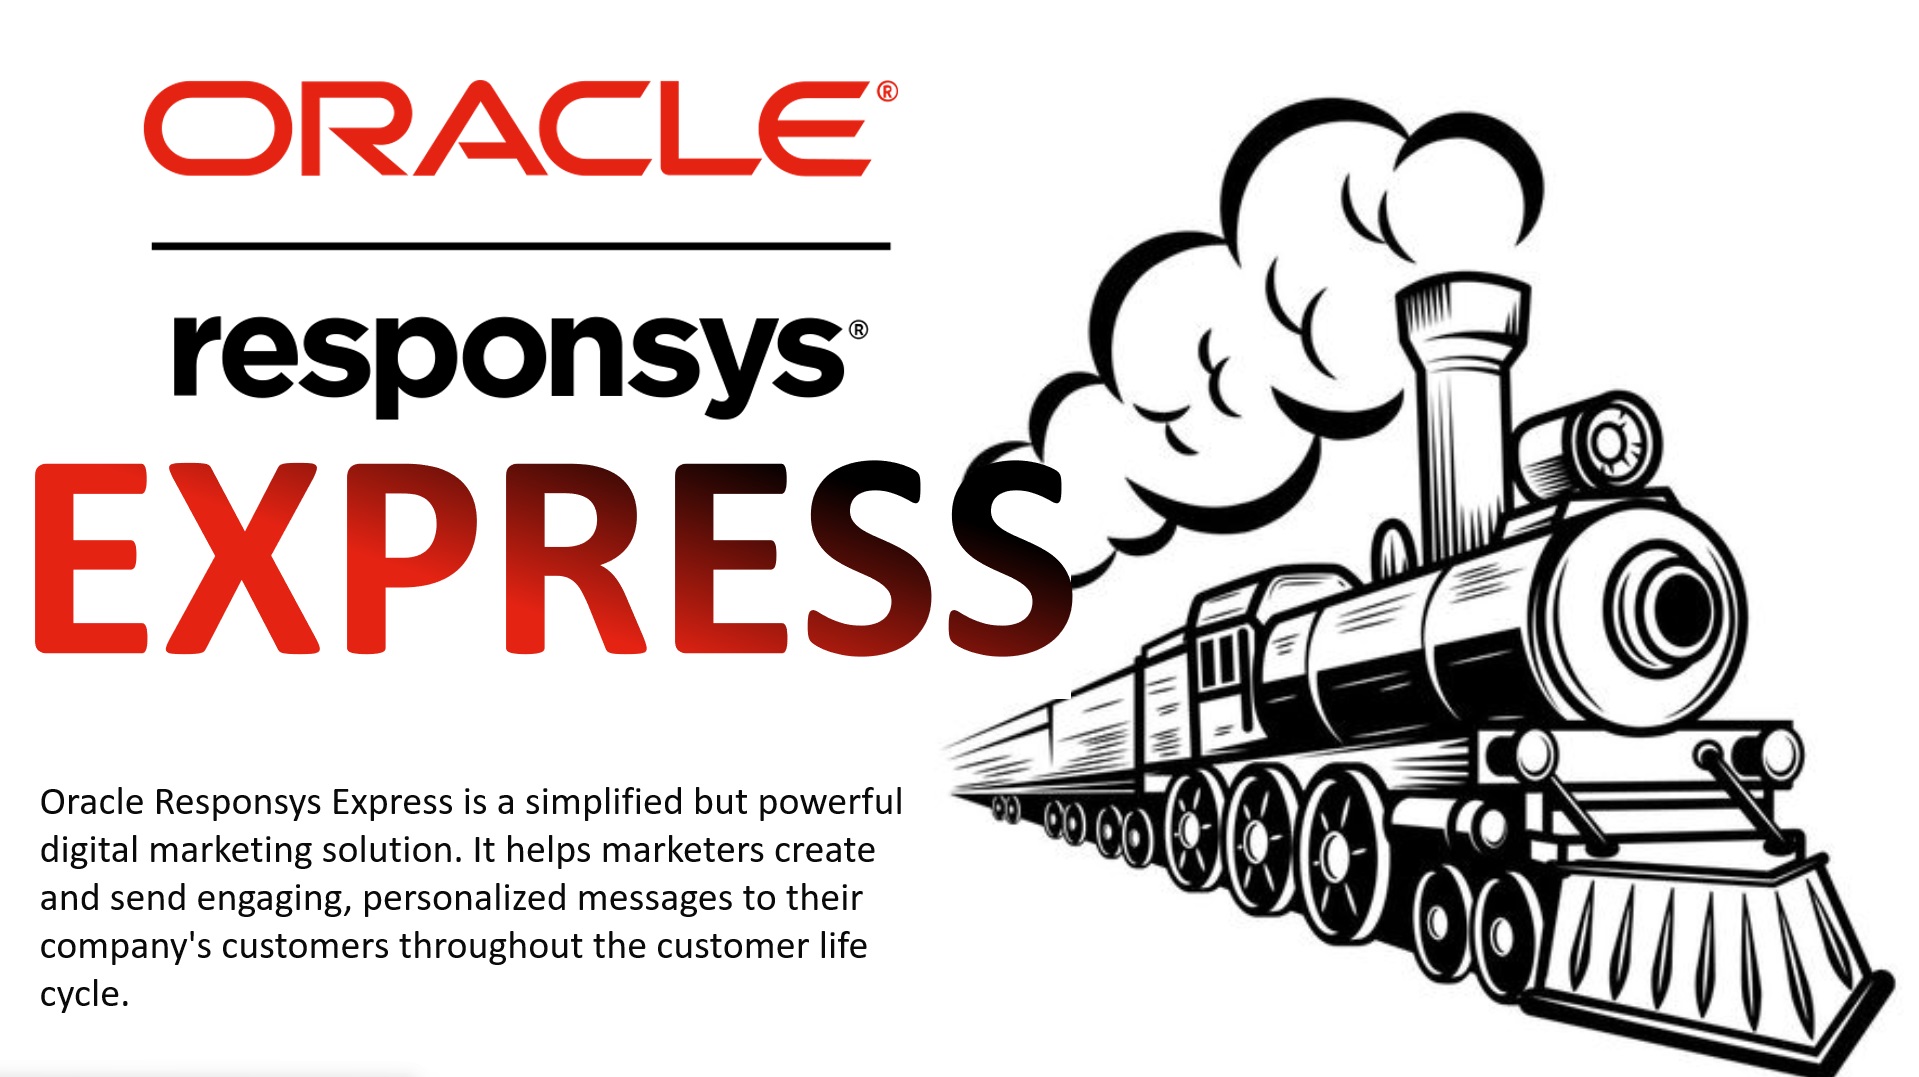 Oracle Responsys Express